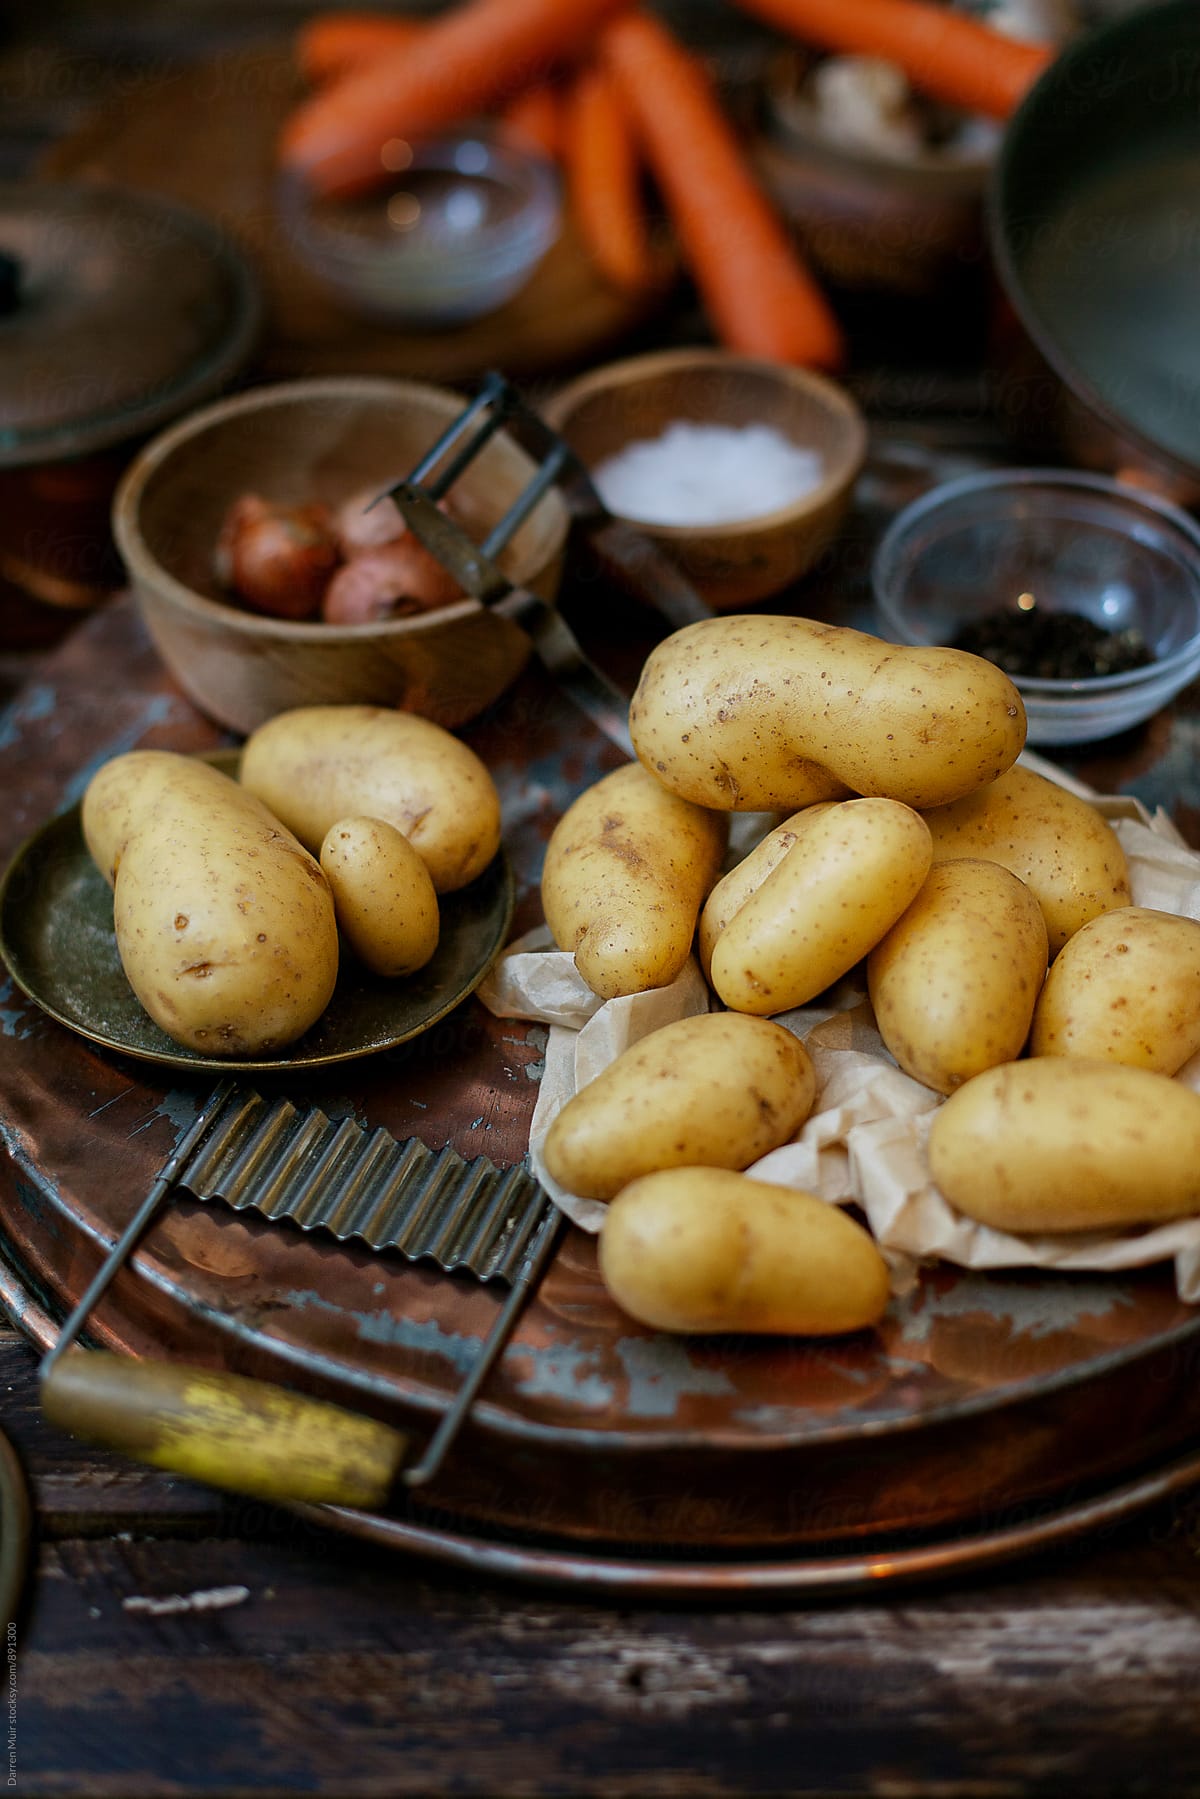 Fingerling potatoes in a rustic background.